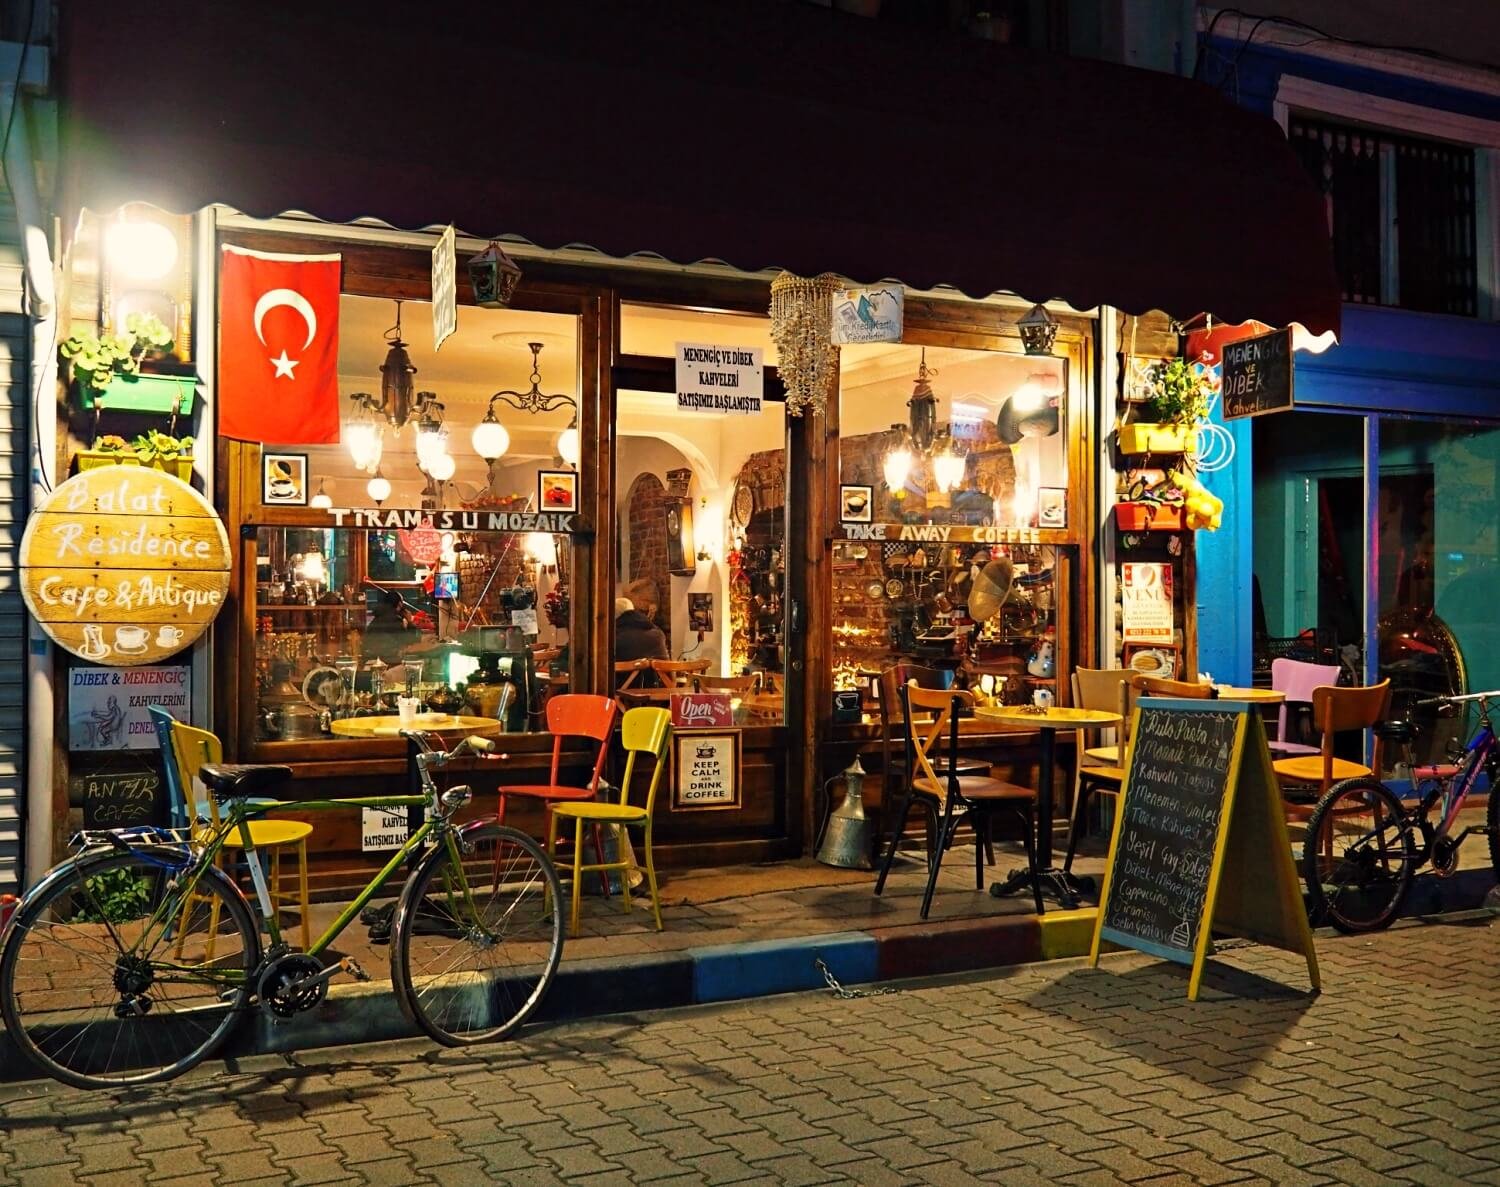 A cosy cafe filled with antiques, Istanbul in December weather